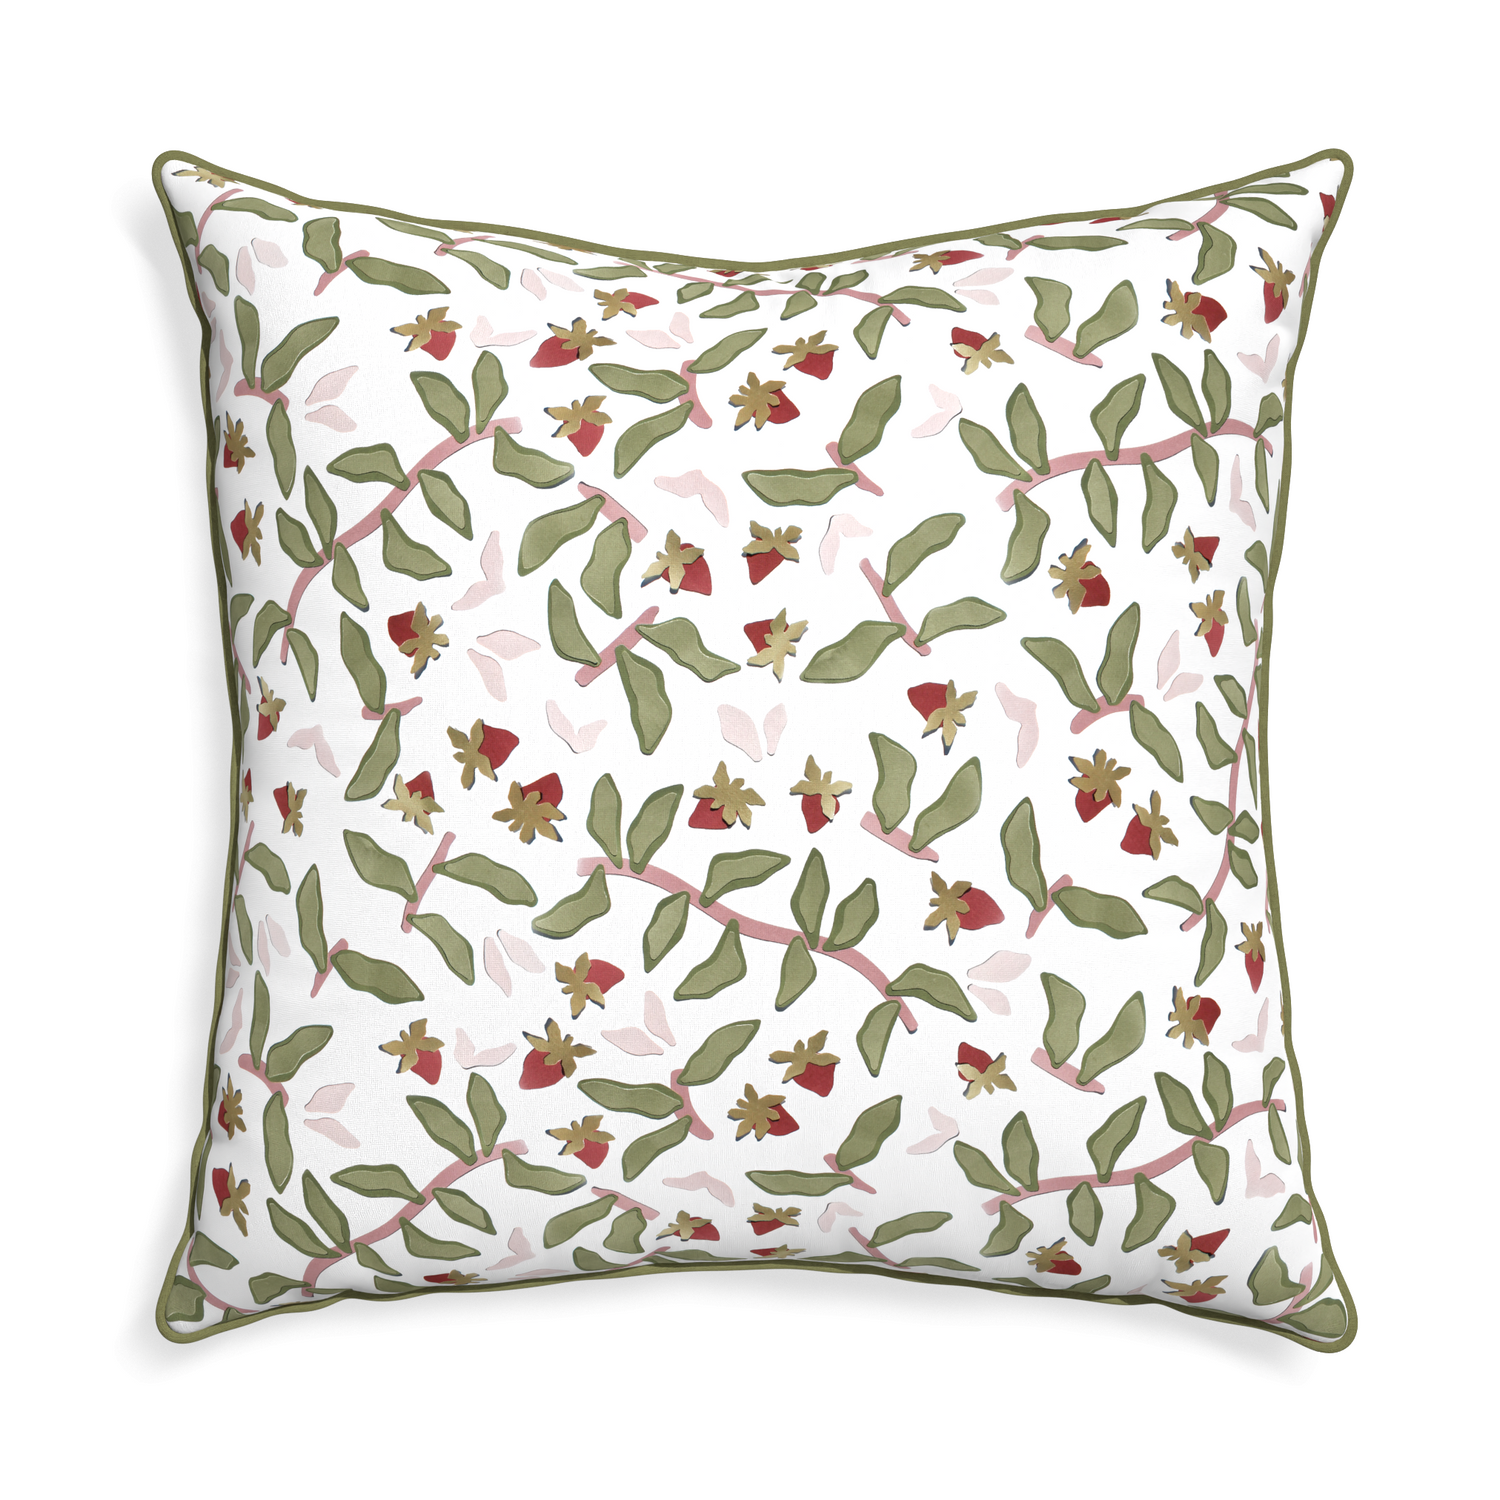 Euro-sham nellie custom pillow with moss piping on white background